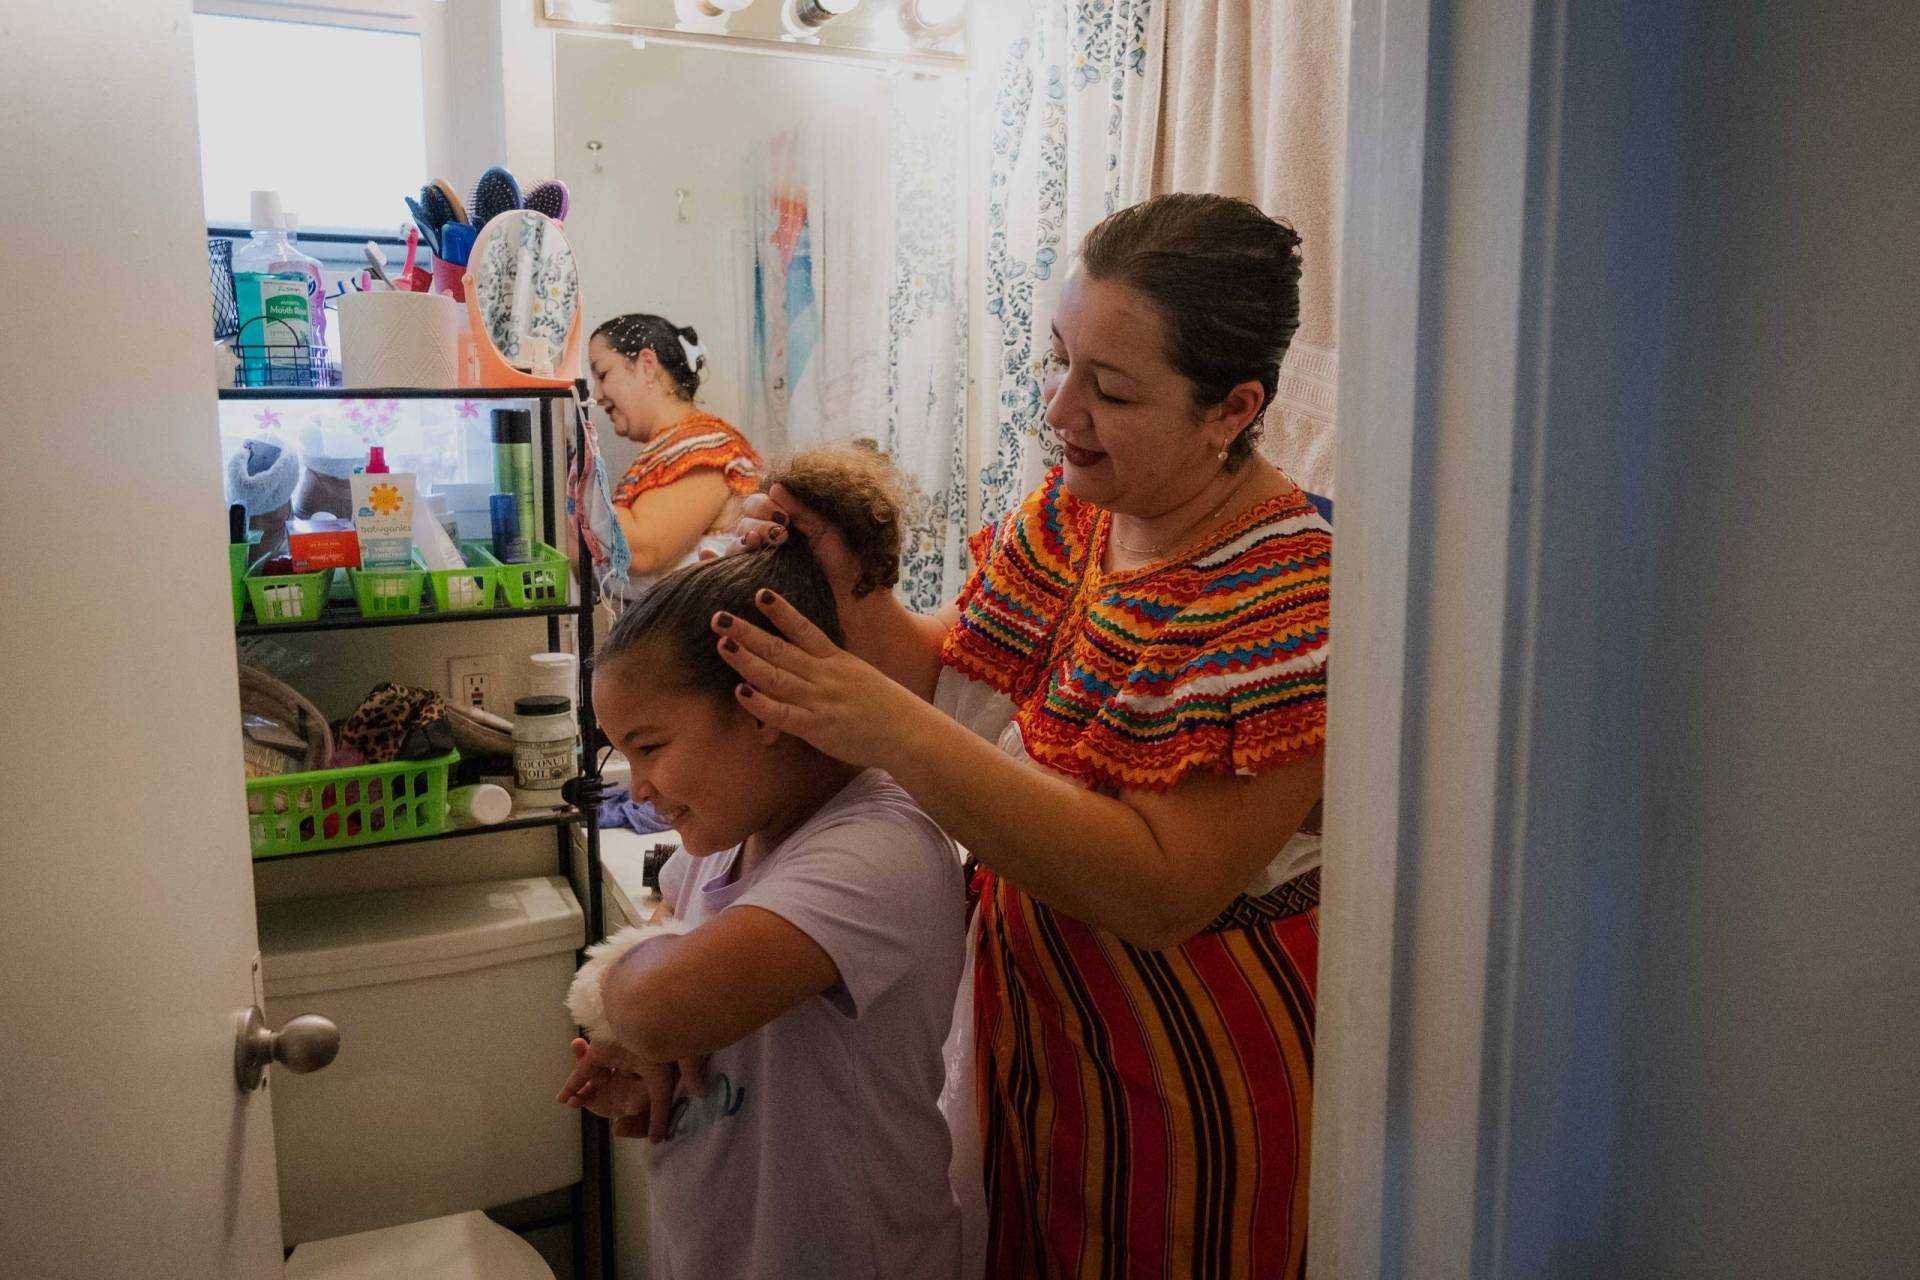 A women does the hair of the girl in a bathroom.